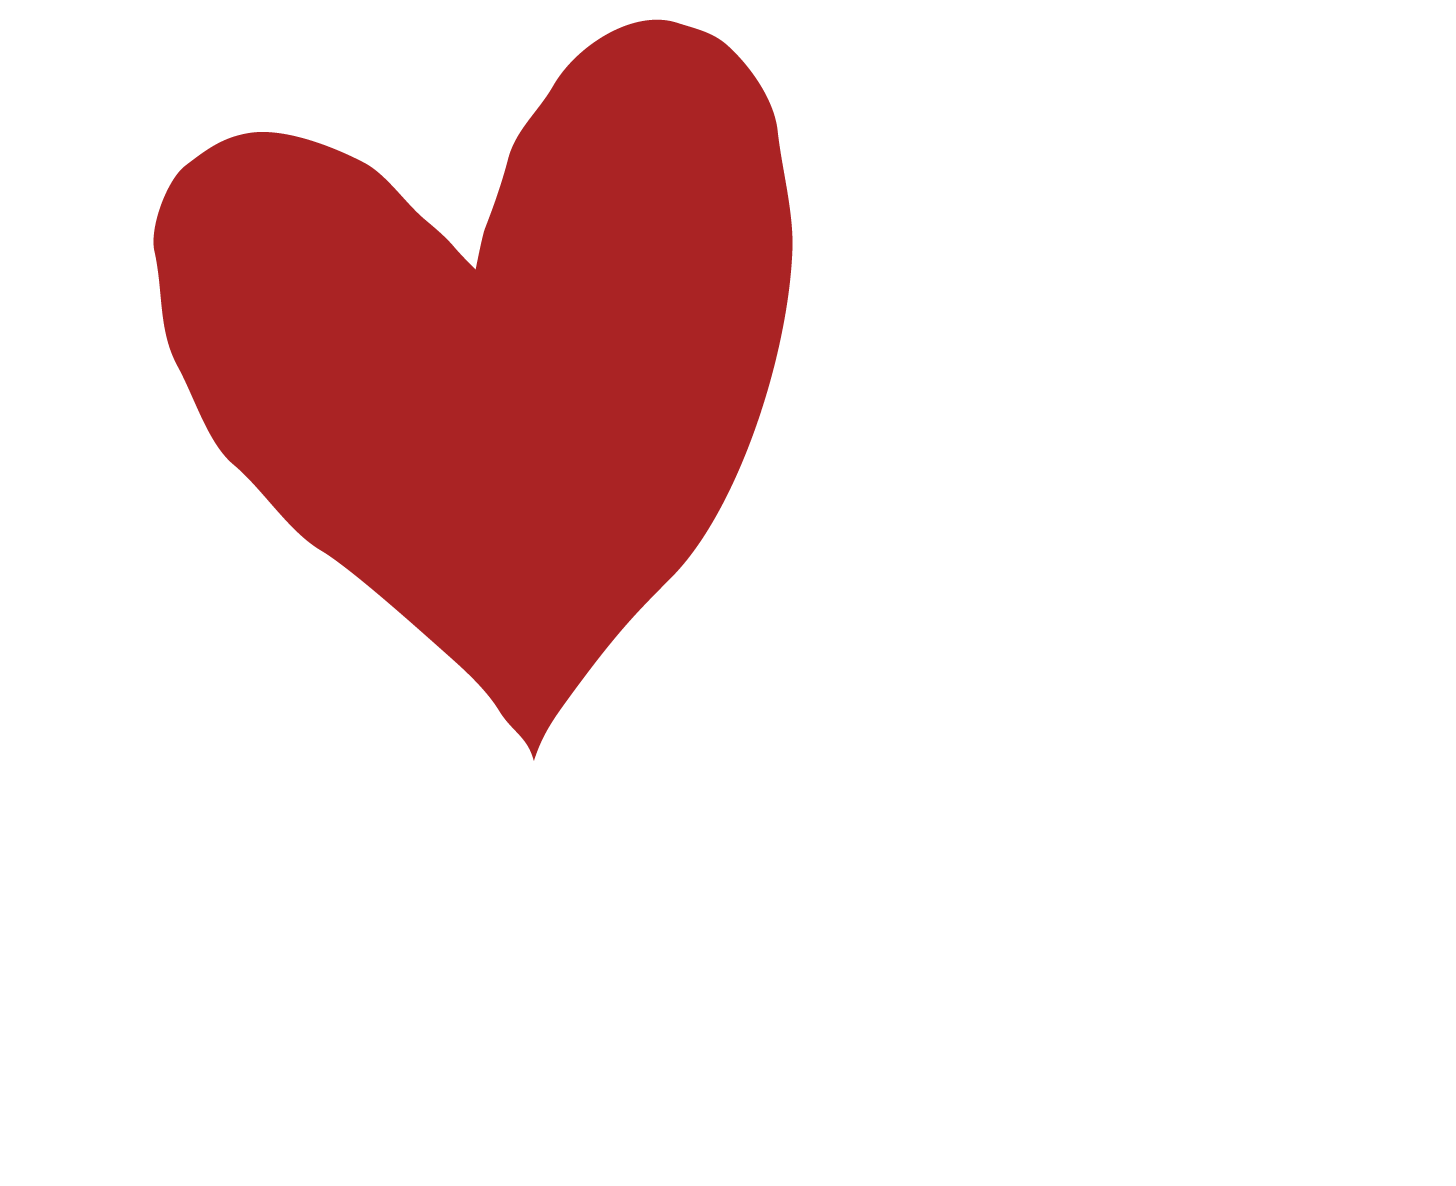 WELLS BC WHITE VERT RED HEART.png